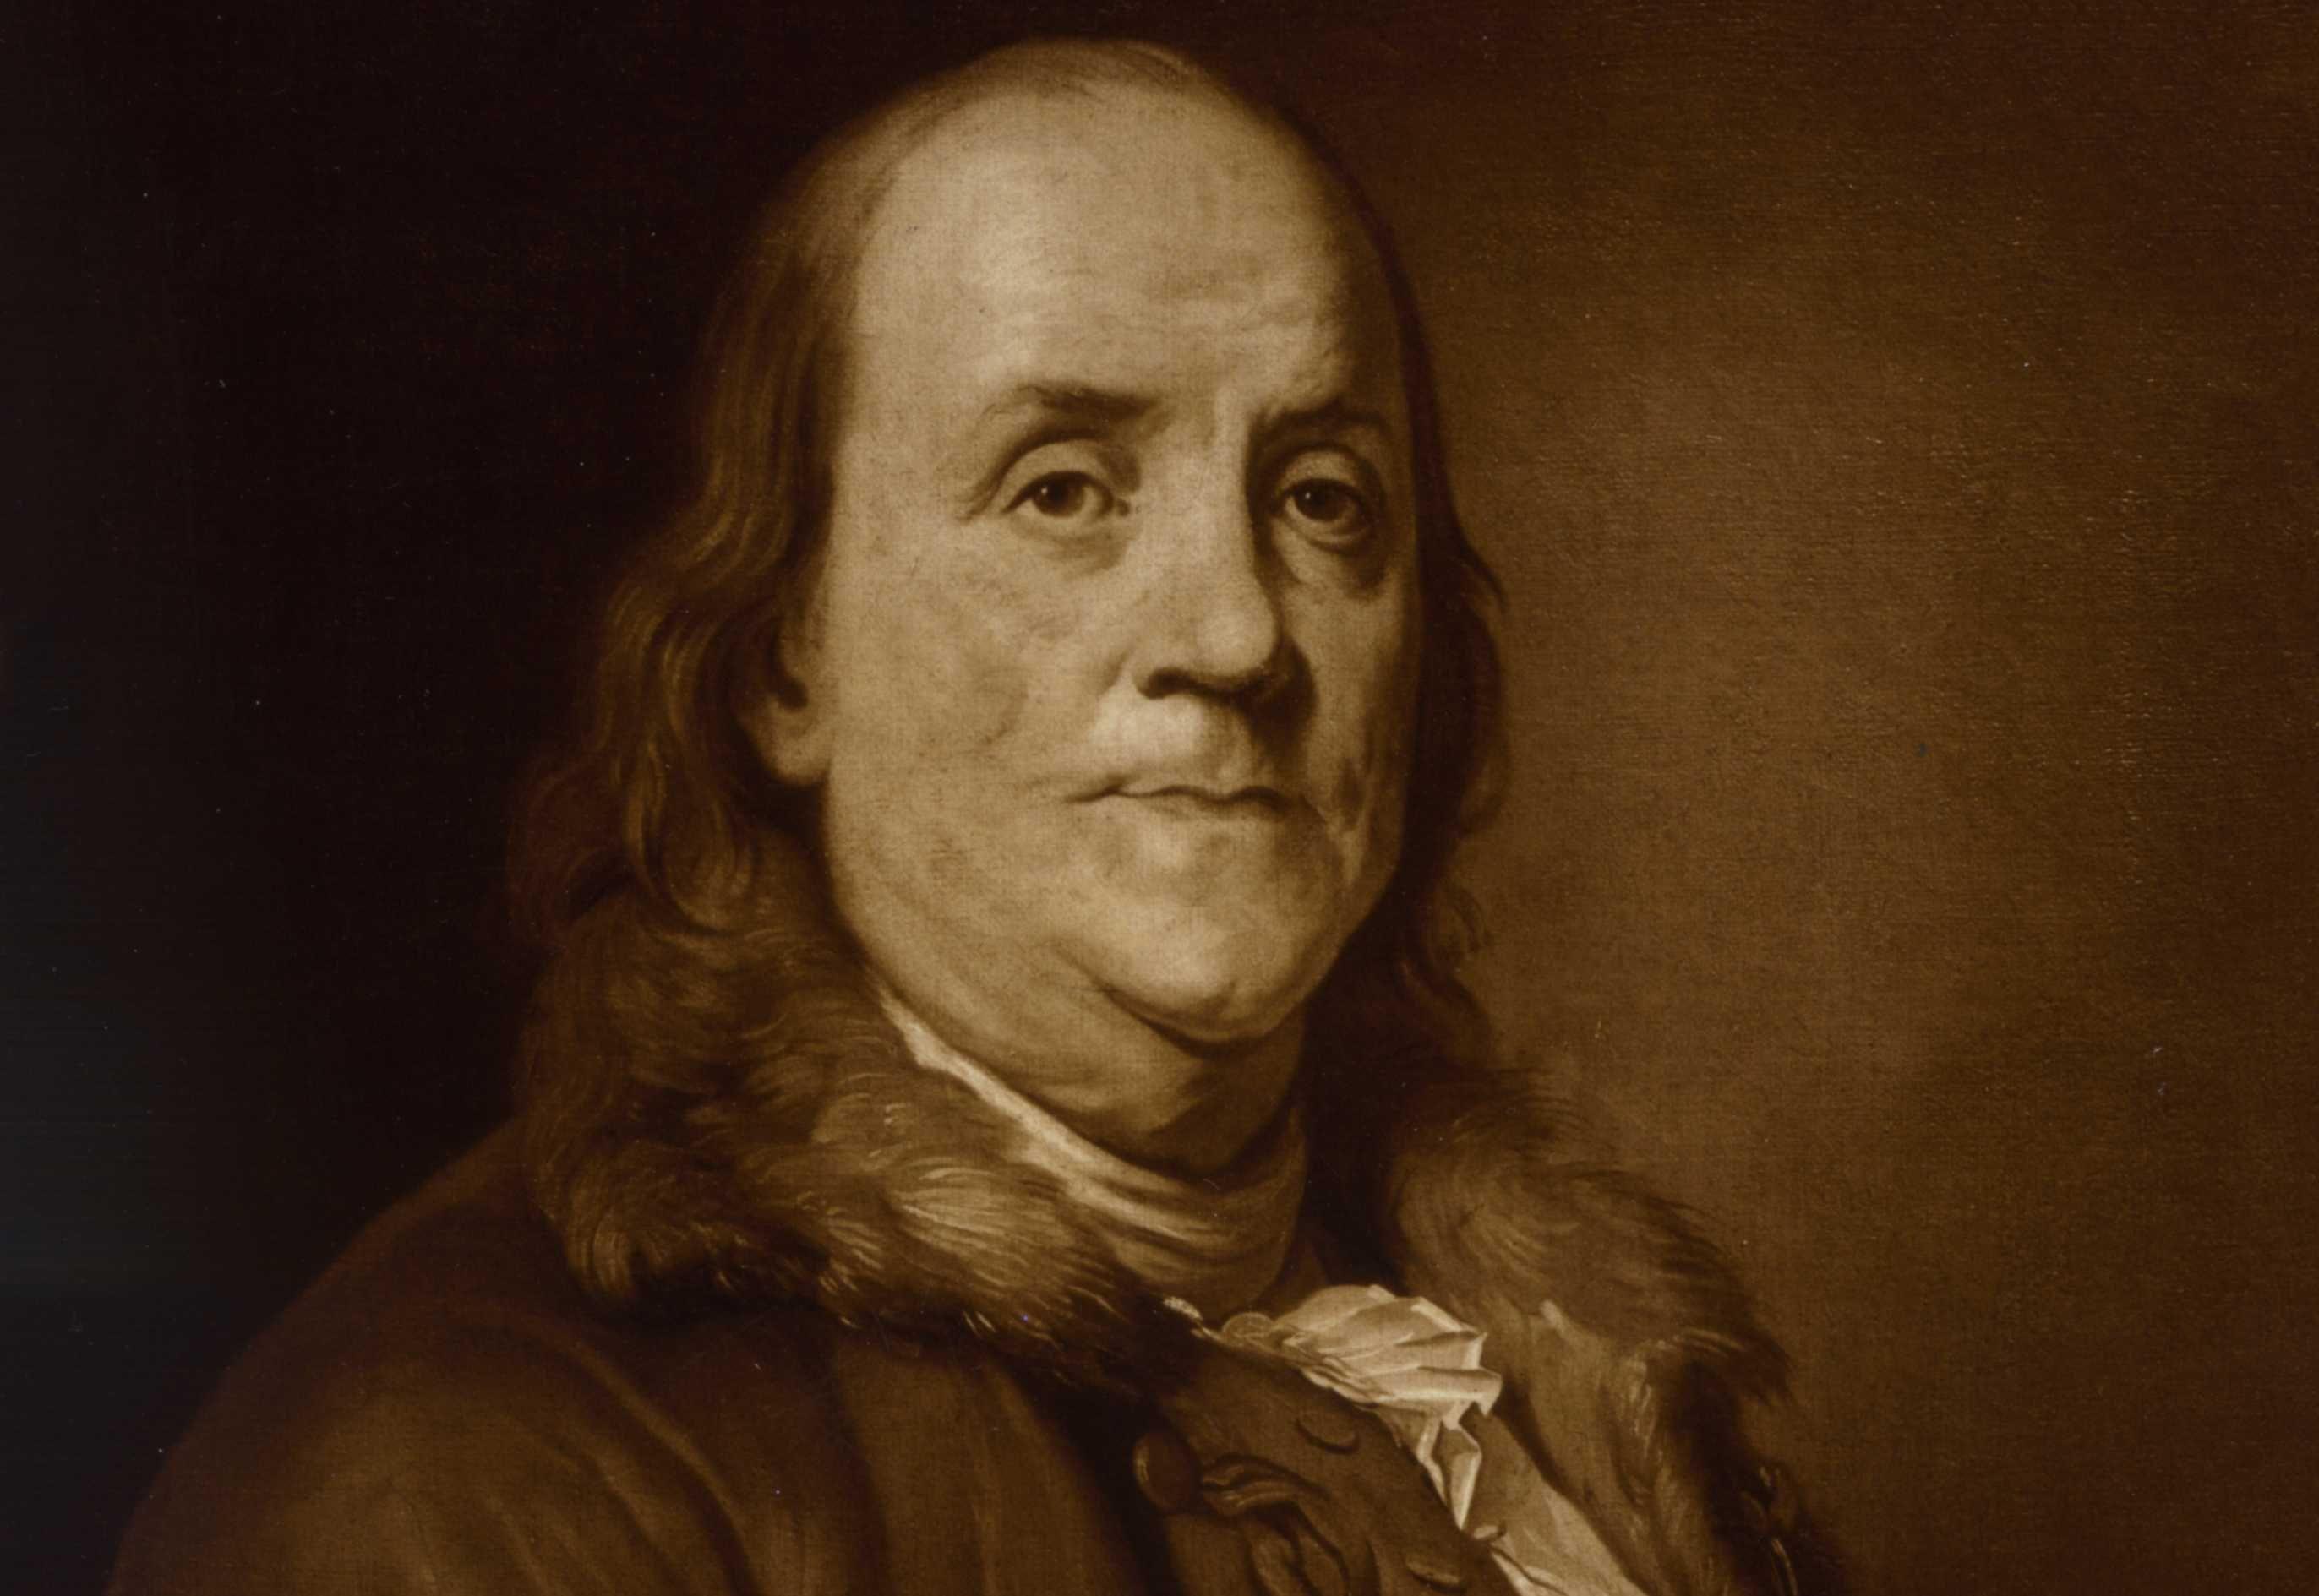 Wallpaper  USA money texture Bill Note benjaminfranklin currency  cnote texturized tatot magicunicornverybest 2560x1920   975689  HD  Wallpapers  WallHere